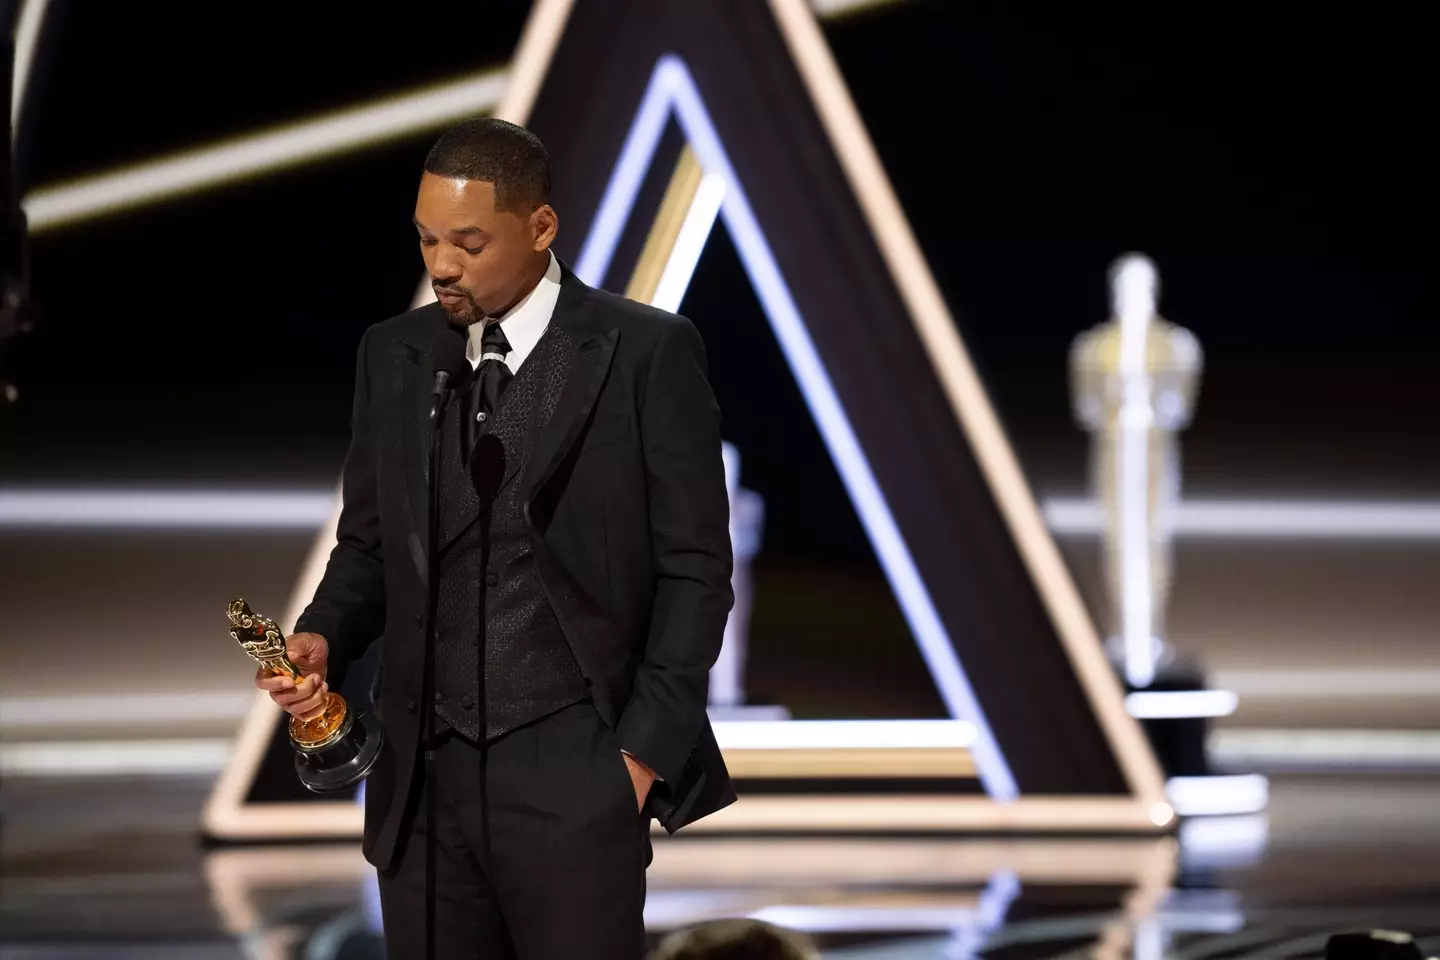 Will Smith gave a tearful apology on stage after slapping Chris Rock across the face.